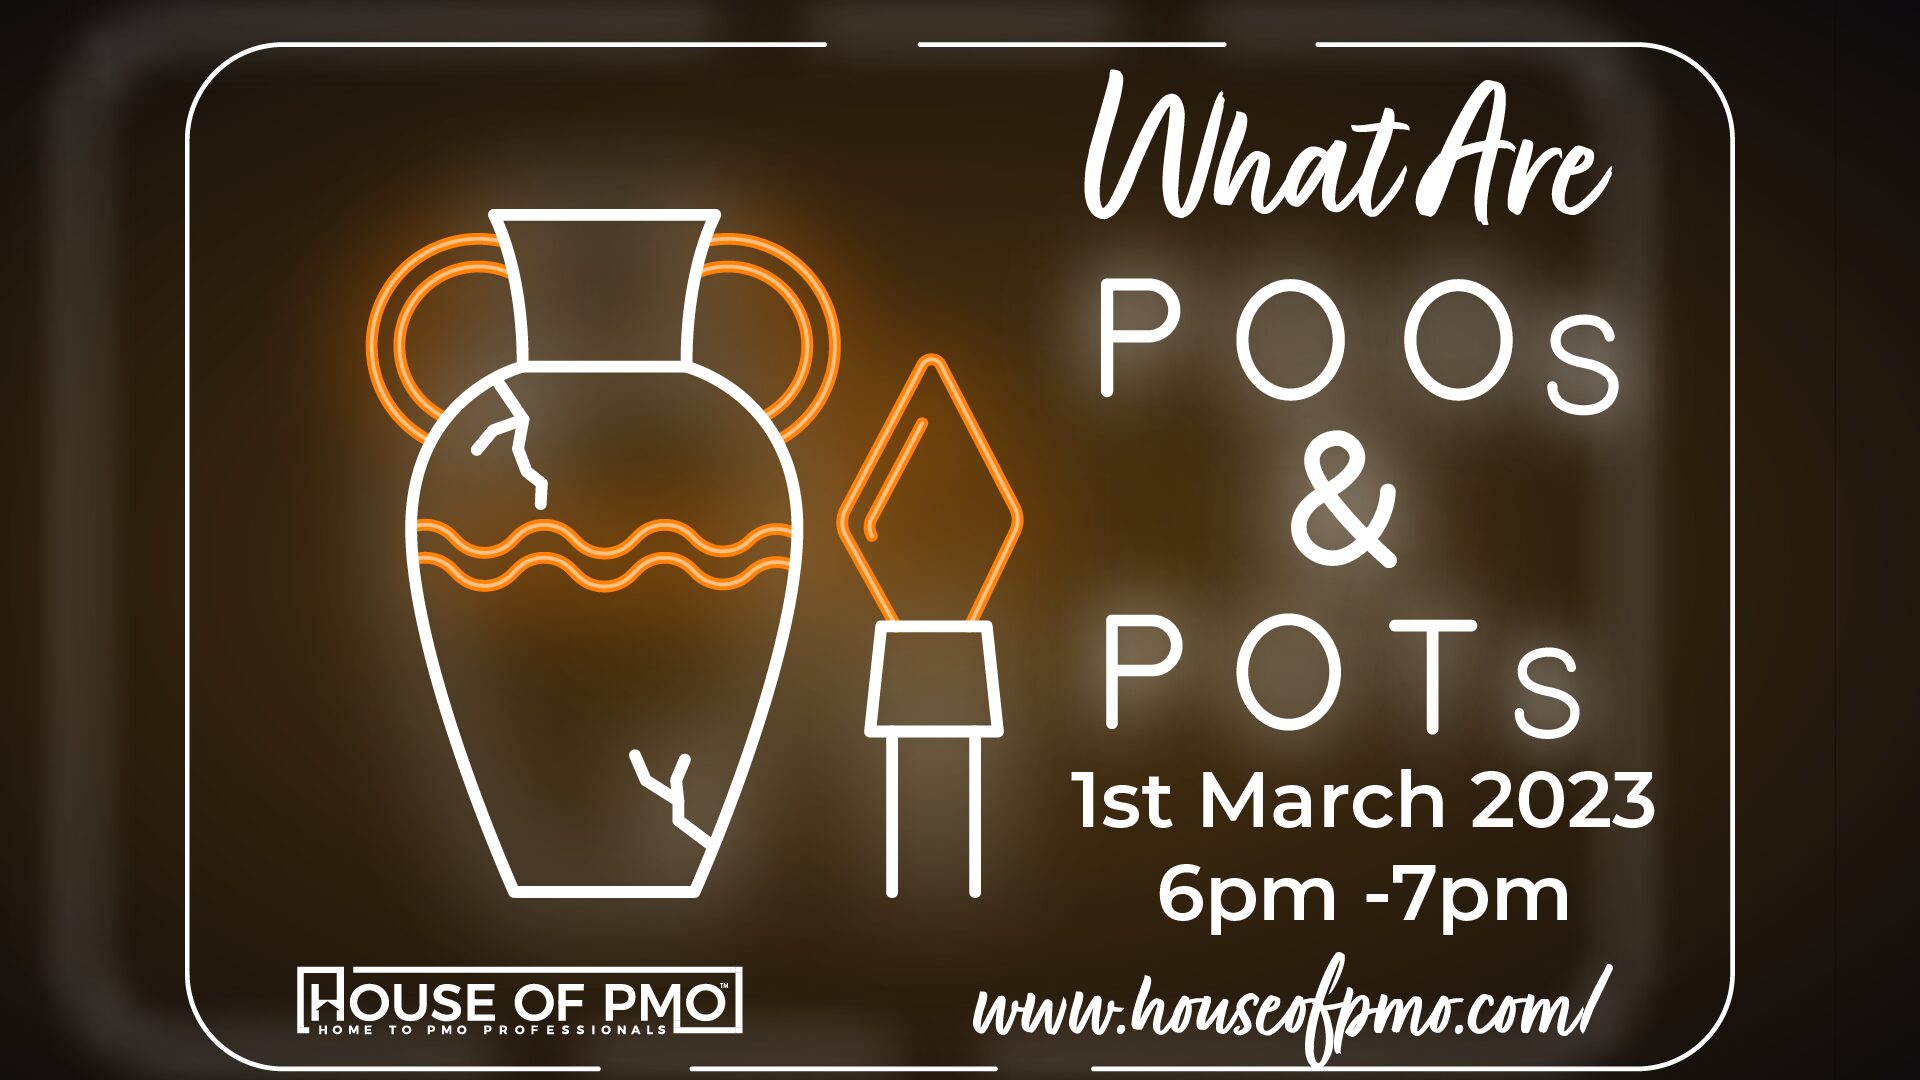 Image for the events poos and pots on march 1st 6pm - 7pm